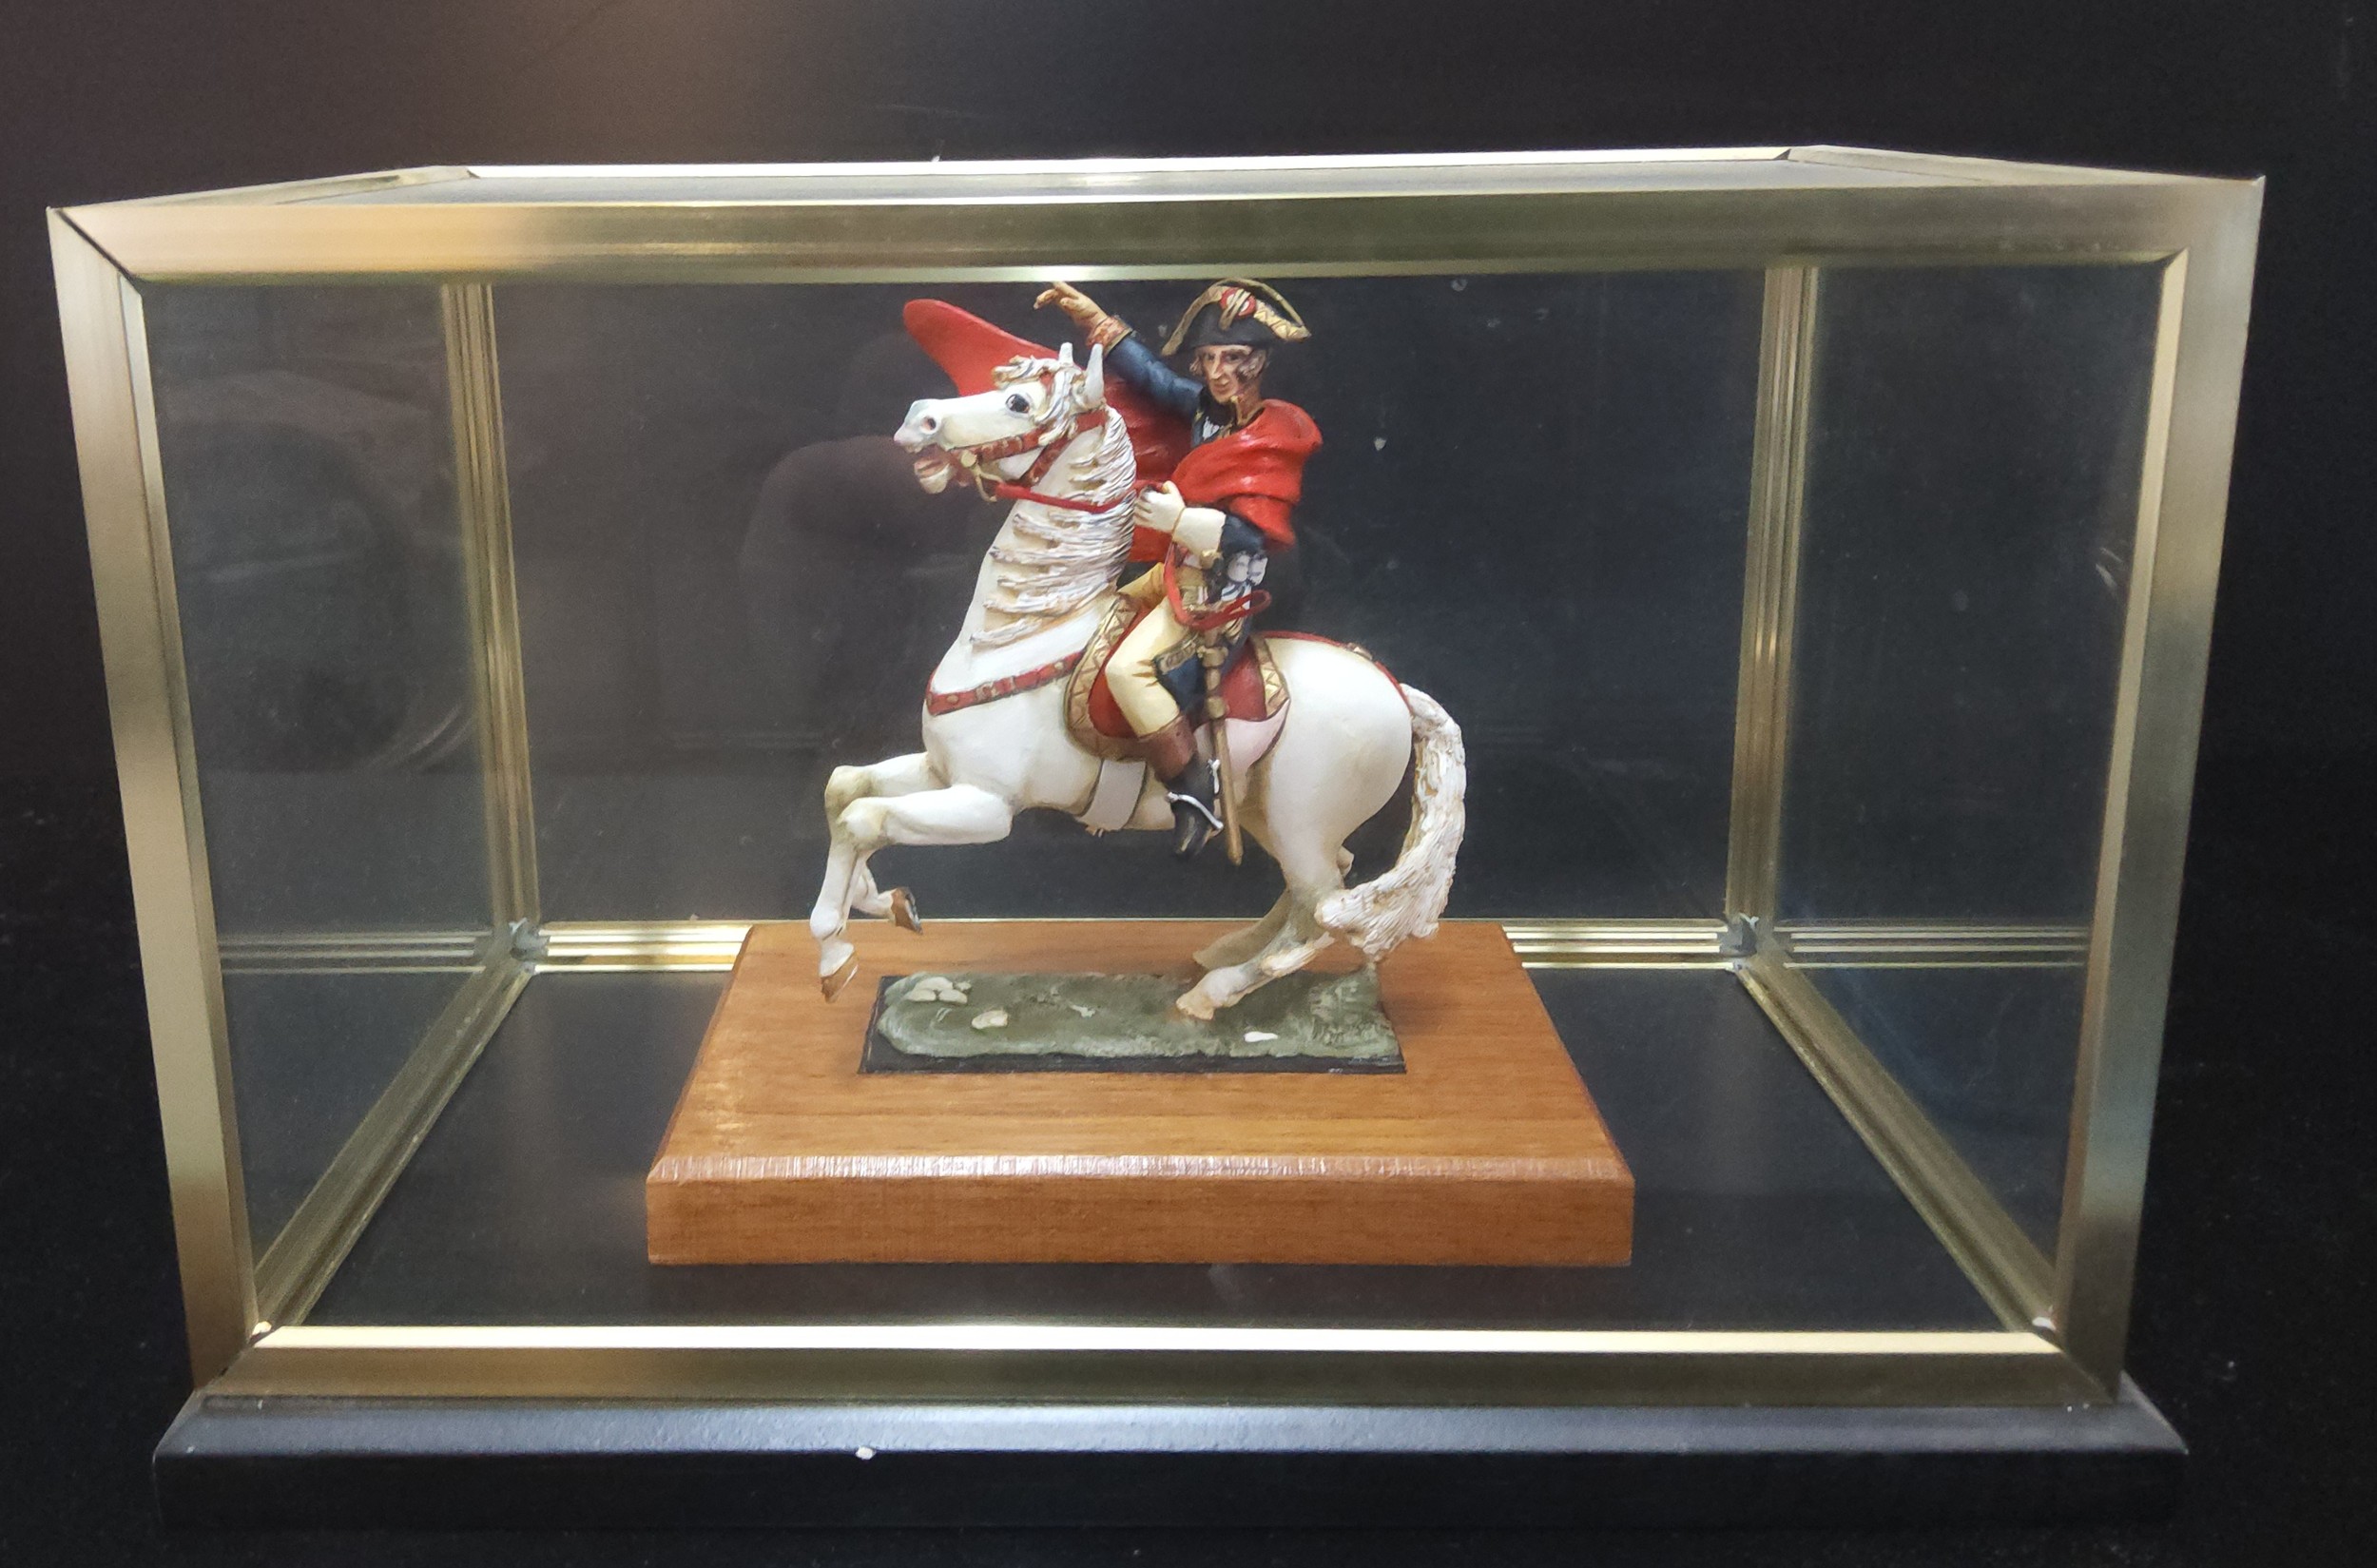 A handpainted die-cast figure of Napoleon on horseback based on the painting by Jacques-Louis David, - Image 3 of 3